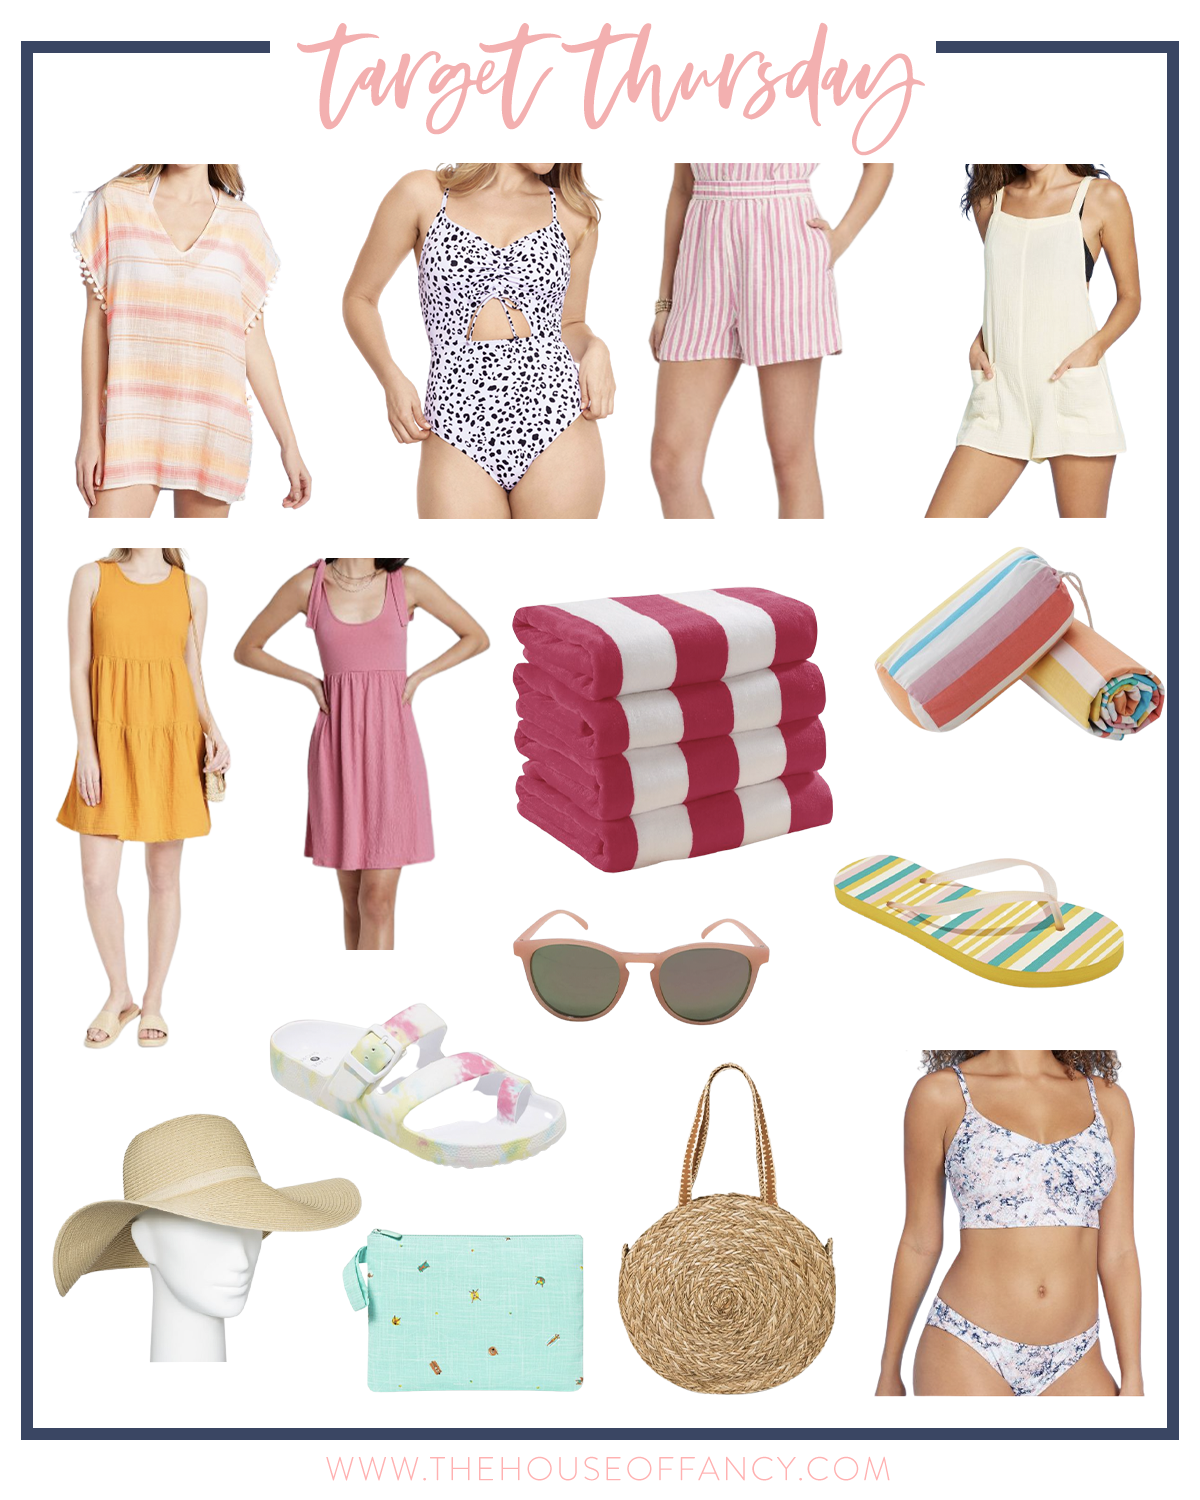 Target Thursday by popular Houston life and style blog, The House of Fancy: collage image swimsuit coverups, one piece swimsuit, pink and white stripe shorts, sleeveless mini dress, pink and white stripe towels, white slide sandals, sunglasses, flip flops, straw sunhat, woven circle bag, and blue tie dye two piece swimsuit. 